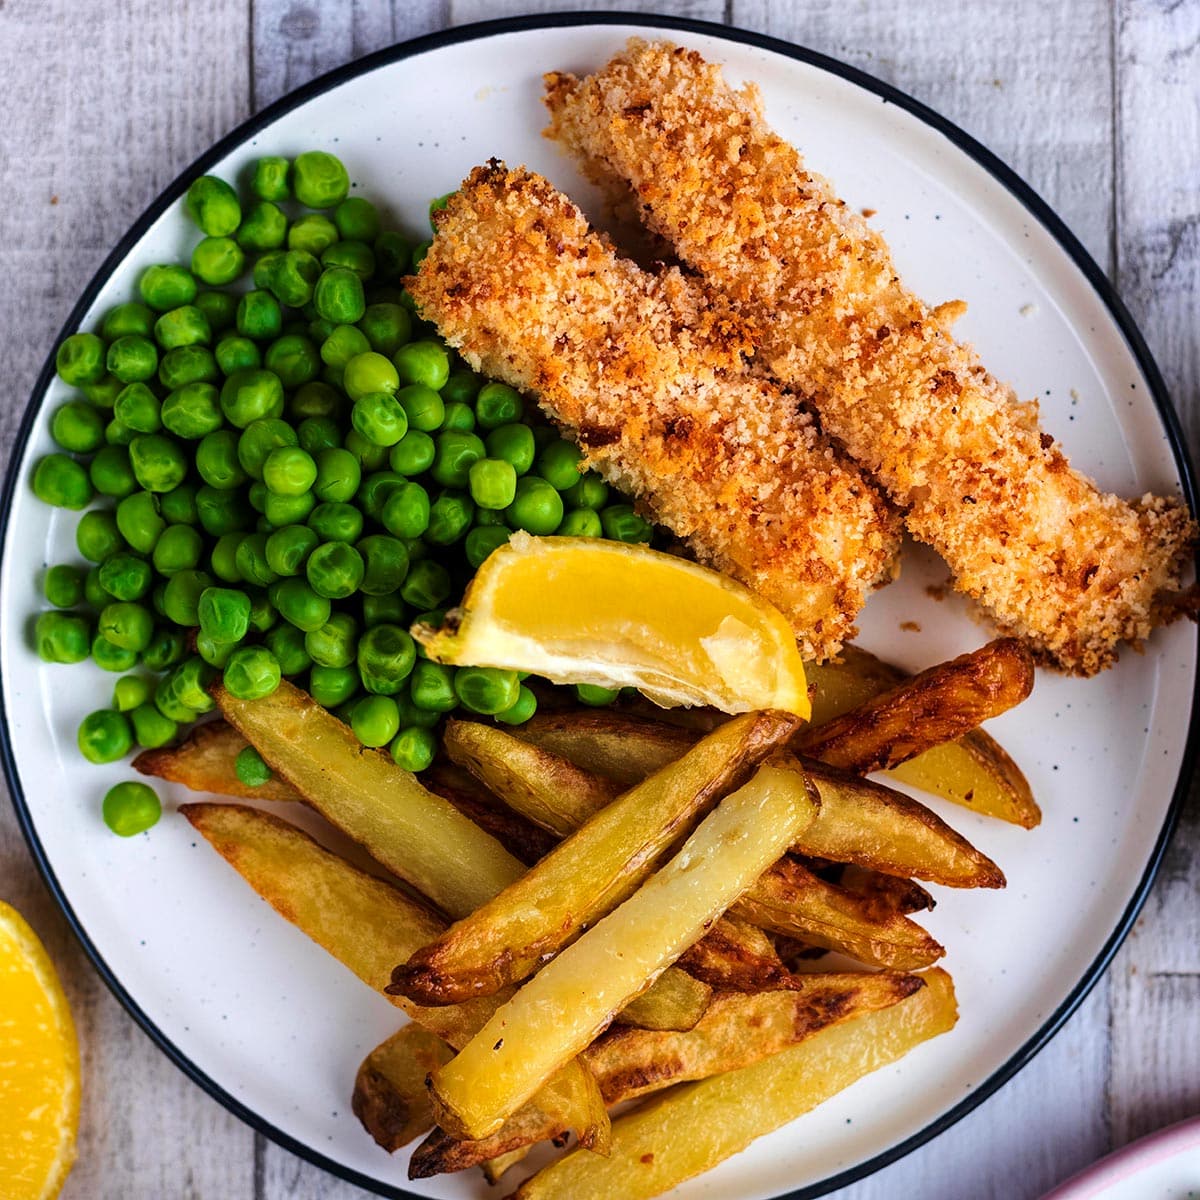 https://hungryhealthyhappy.com/wp-content/uploads/2011/07/Fish-Fingers-featured-b-1.jpg